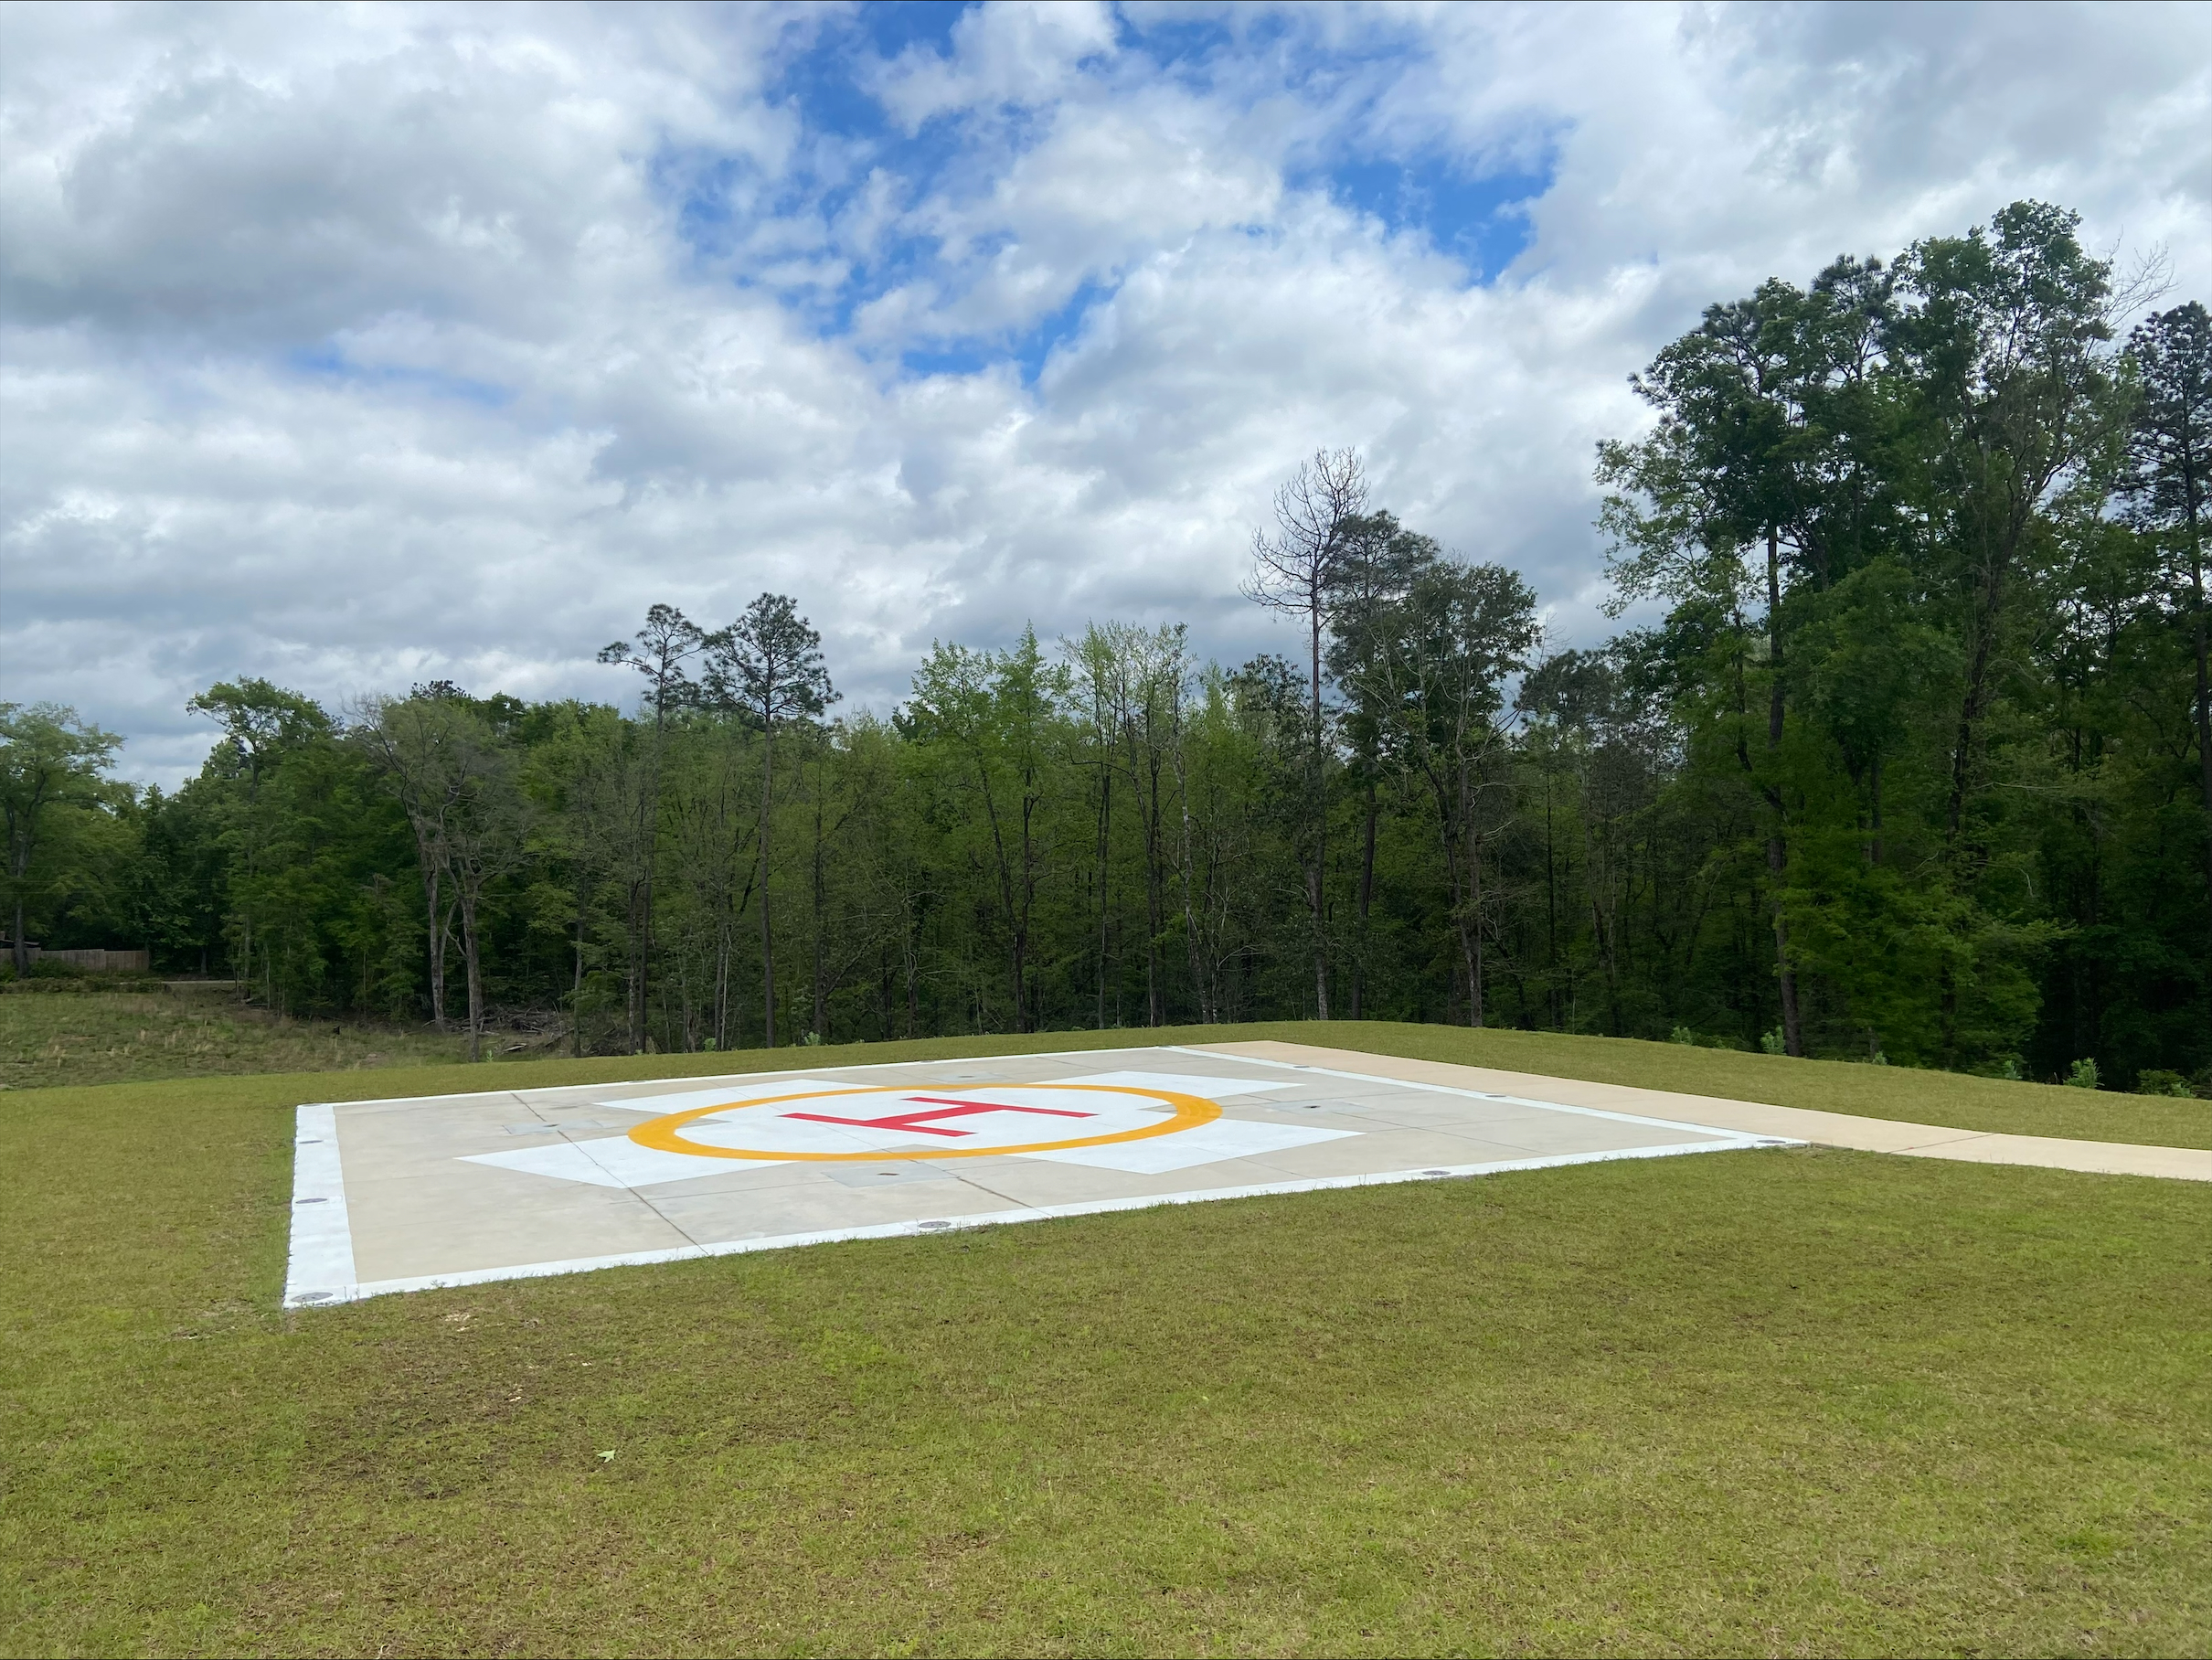 A helipad sits in a clearing